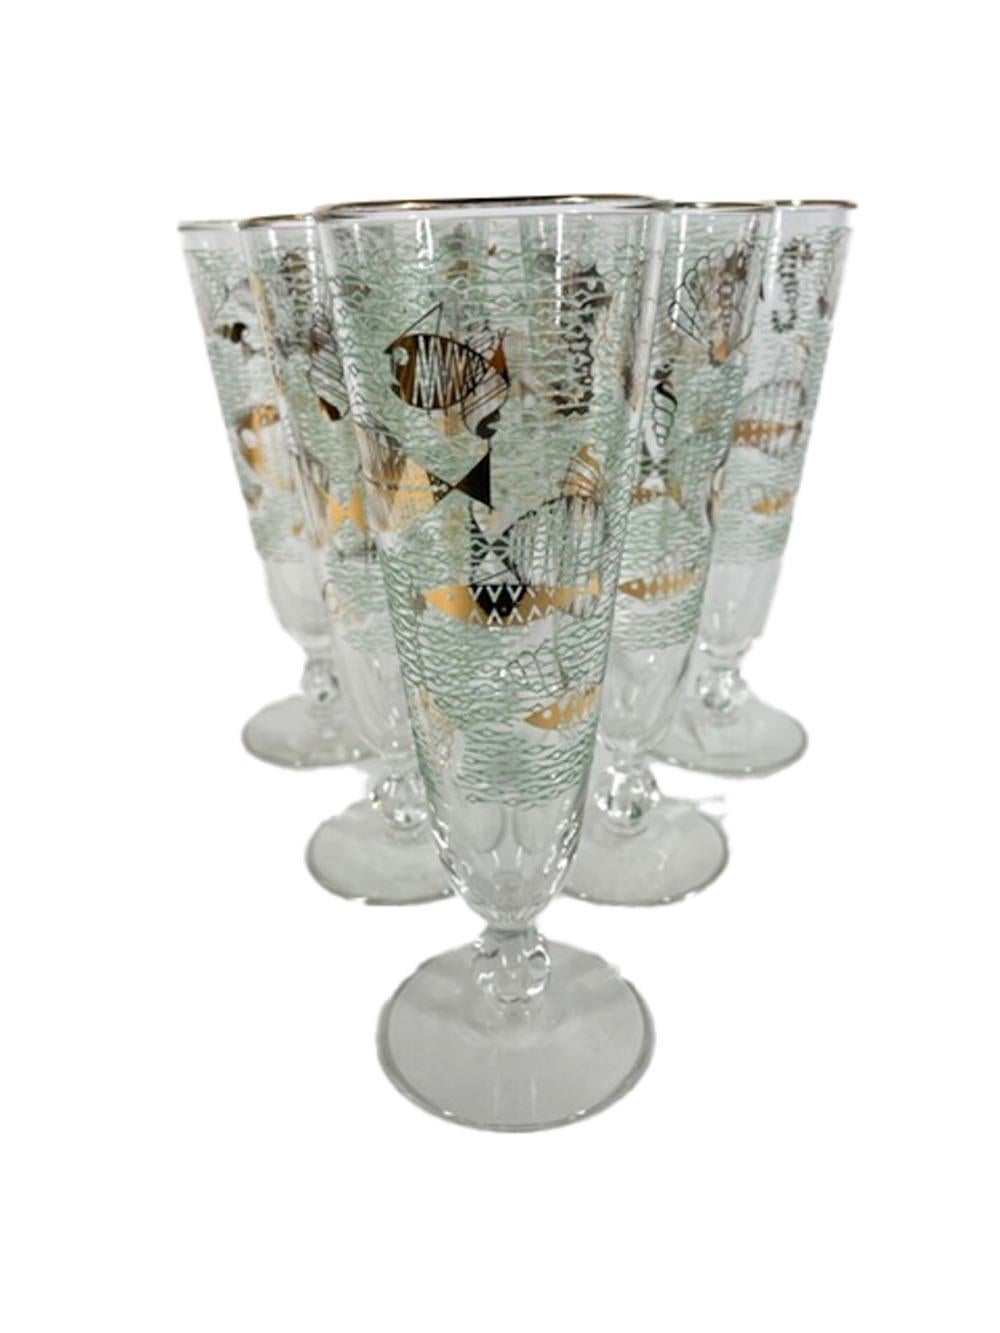 Mid-Century Modern Vintage Libbey Glass Pilsner Glasses in the Marine Life Pattern